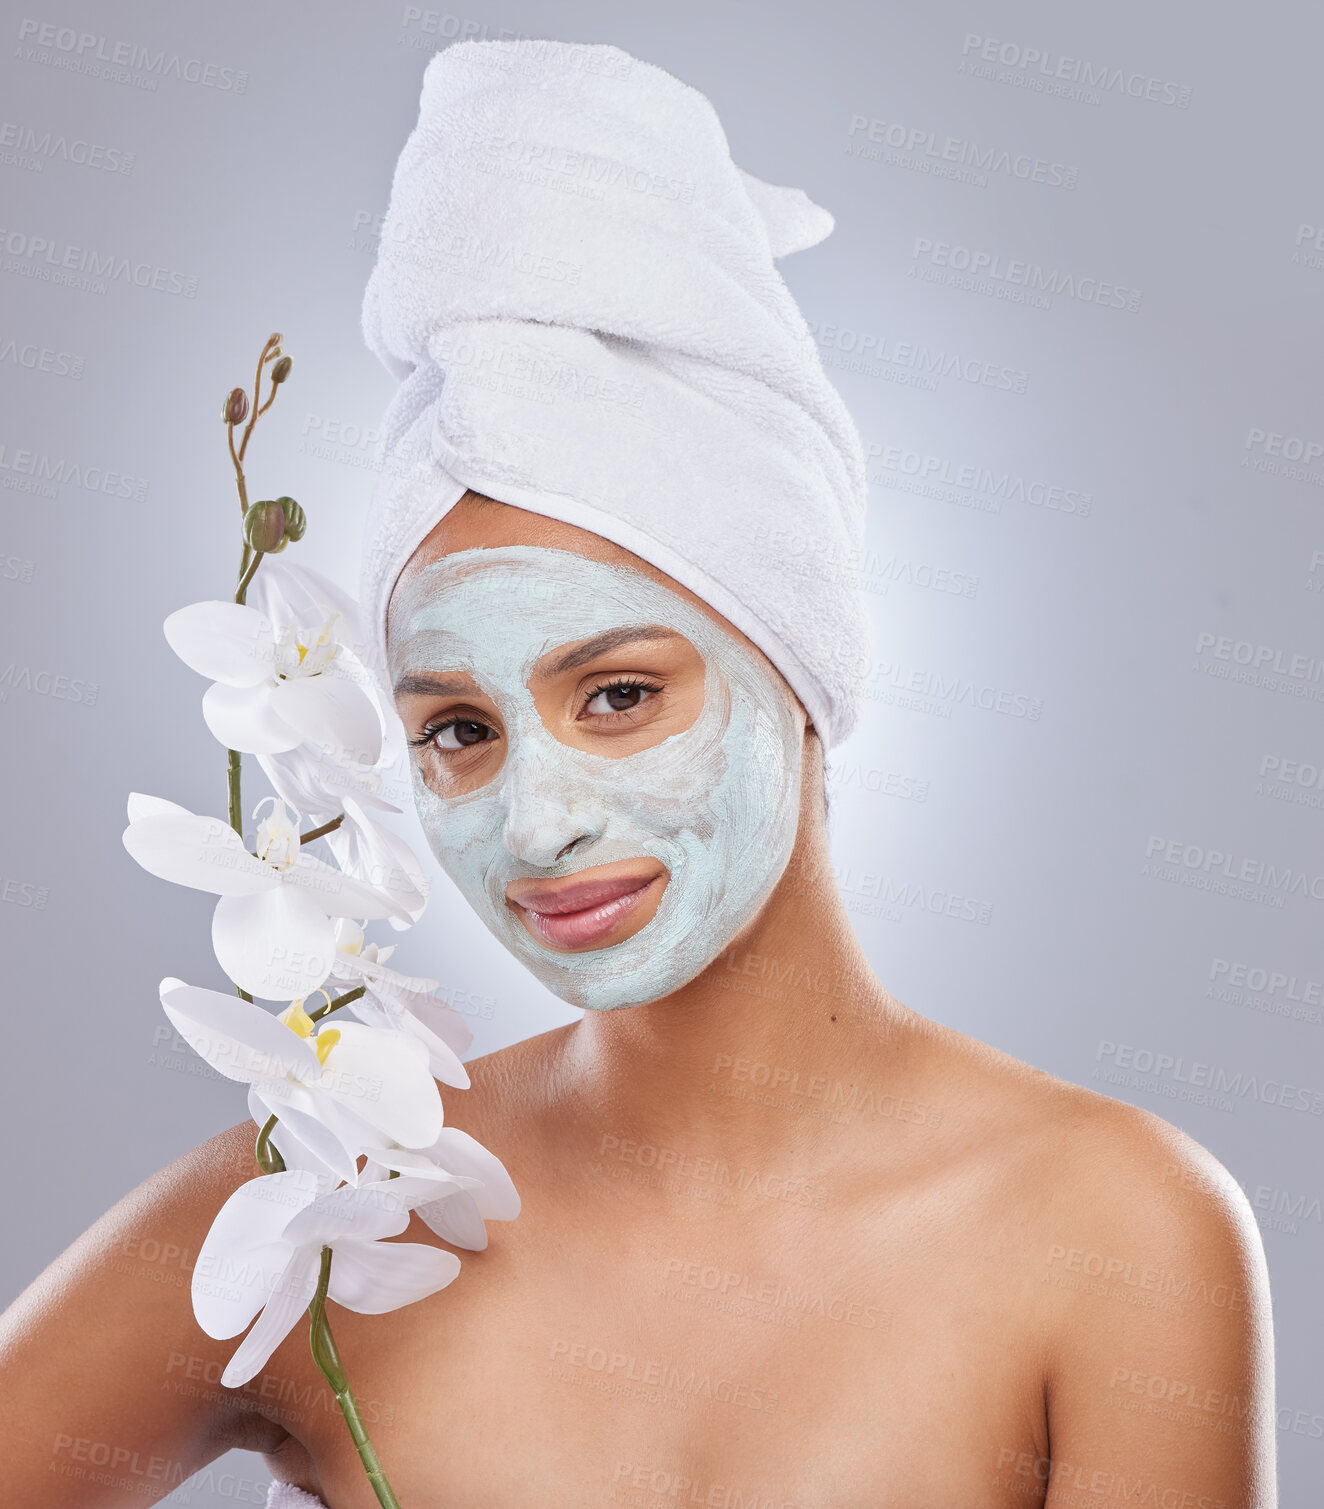 Buy stock photo Shot of an attractive young woman wearing a face mask and holding an orchid in the studio